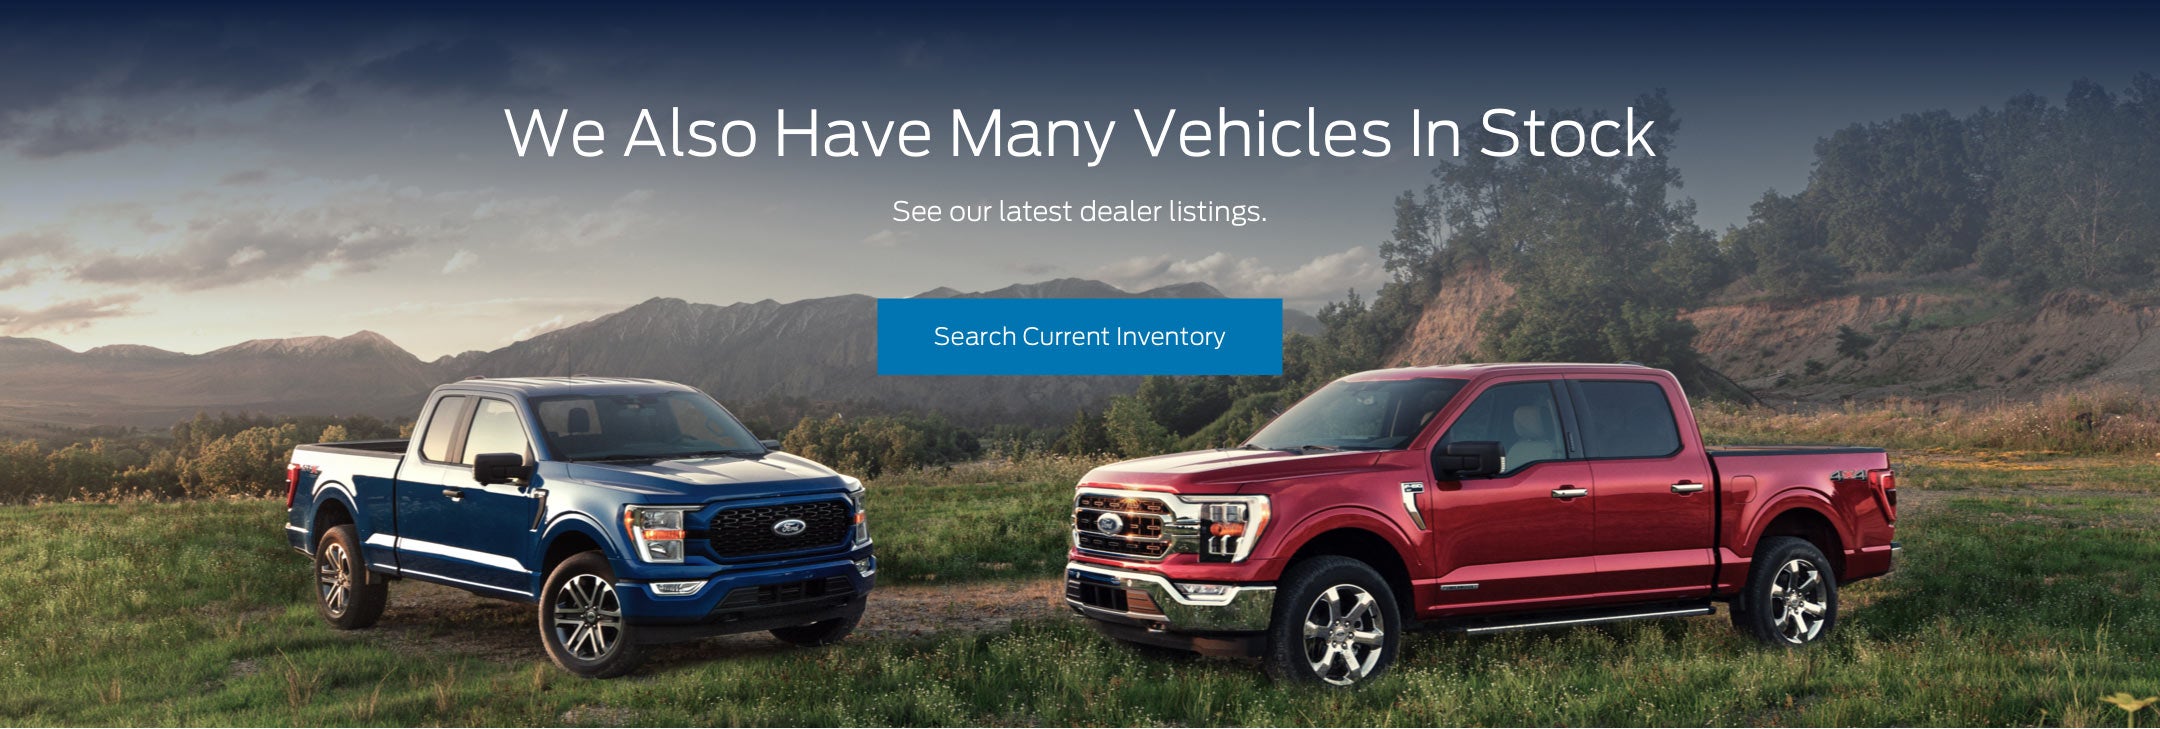 Ford vehicles in stock | Klaben Ford Lincoln of Warren, Inc. in Warren OH